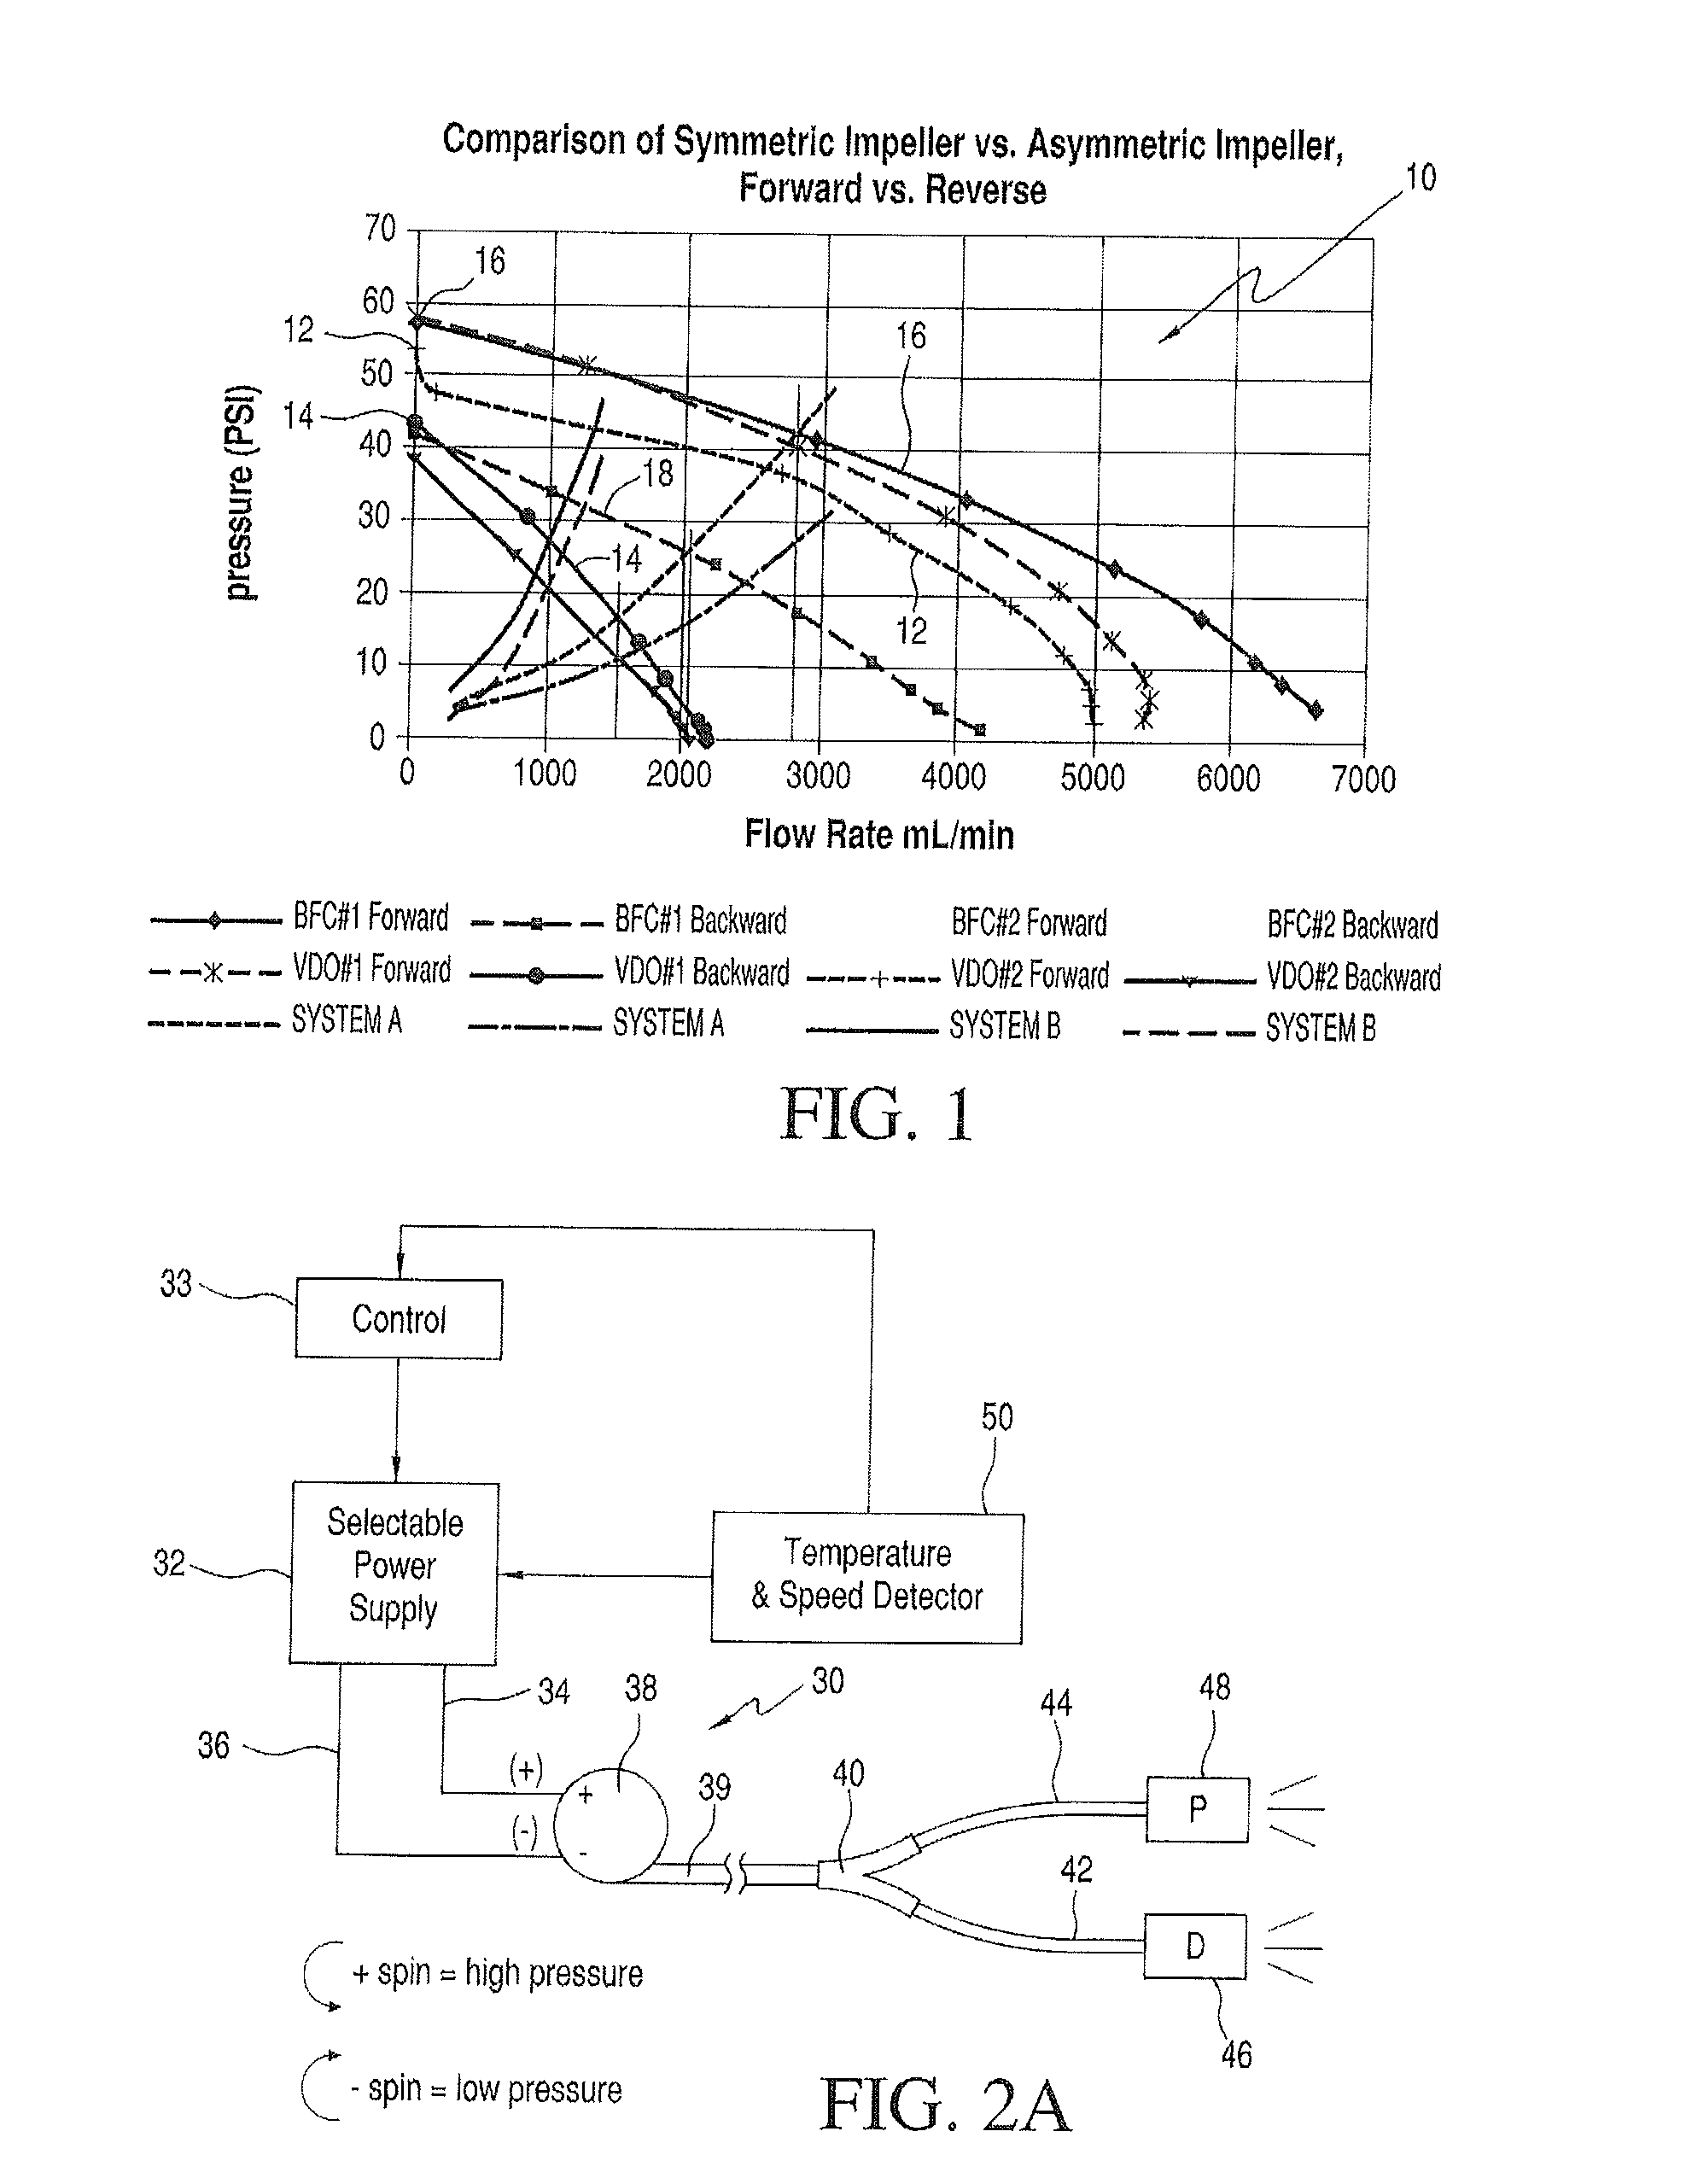 Adaptive, multi-mode washer system and control method